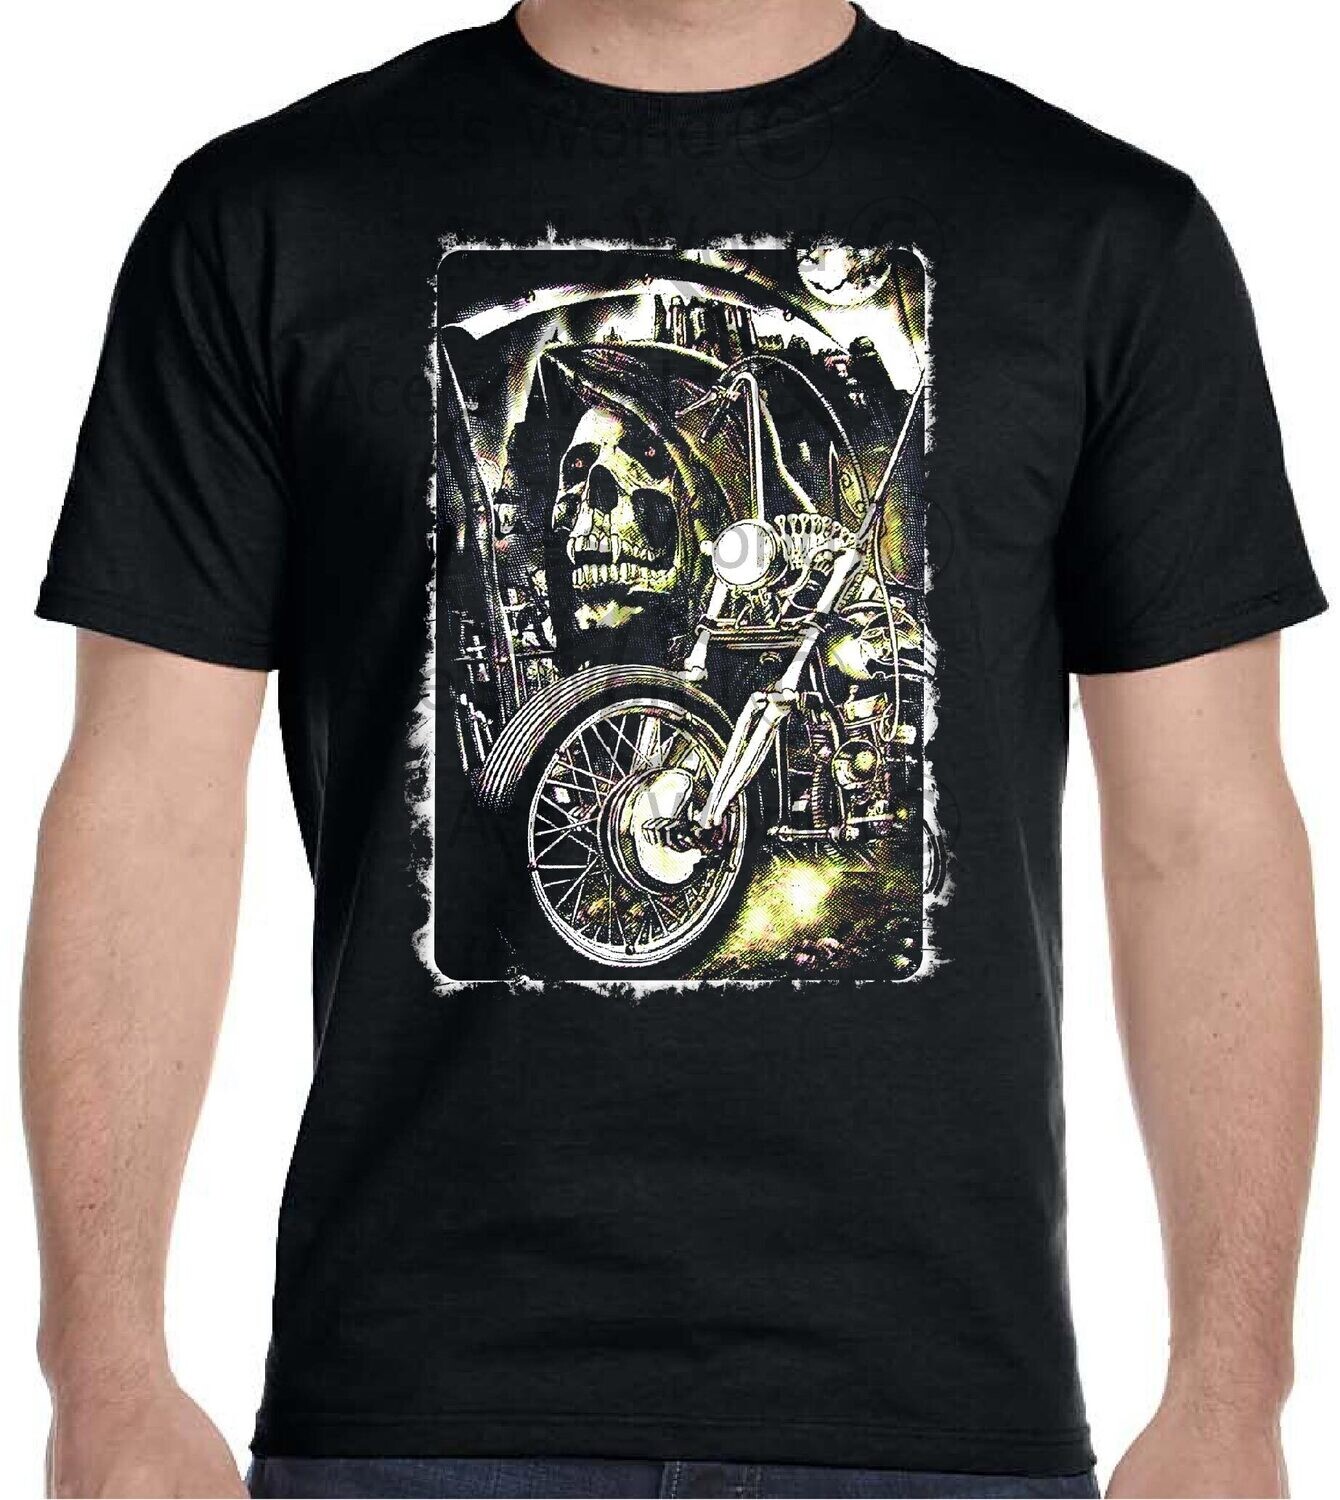 STAY AHEAD OF THE REAPER BLACK T-Shirt